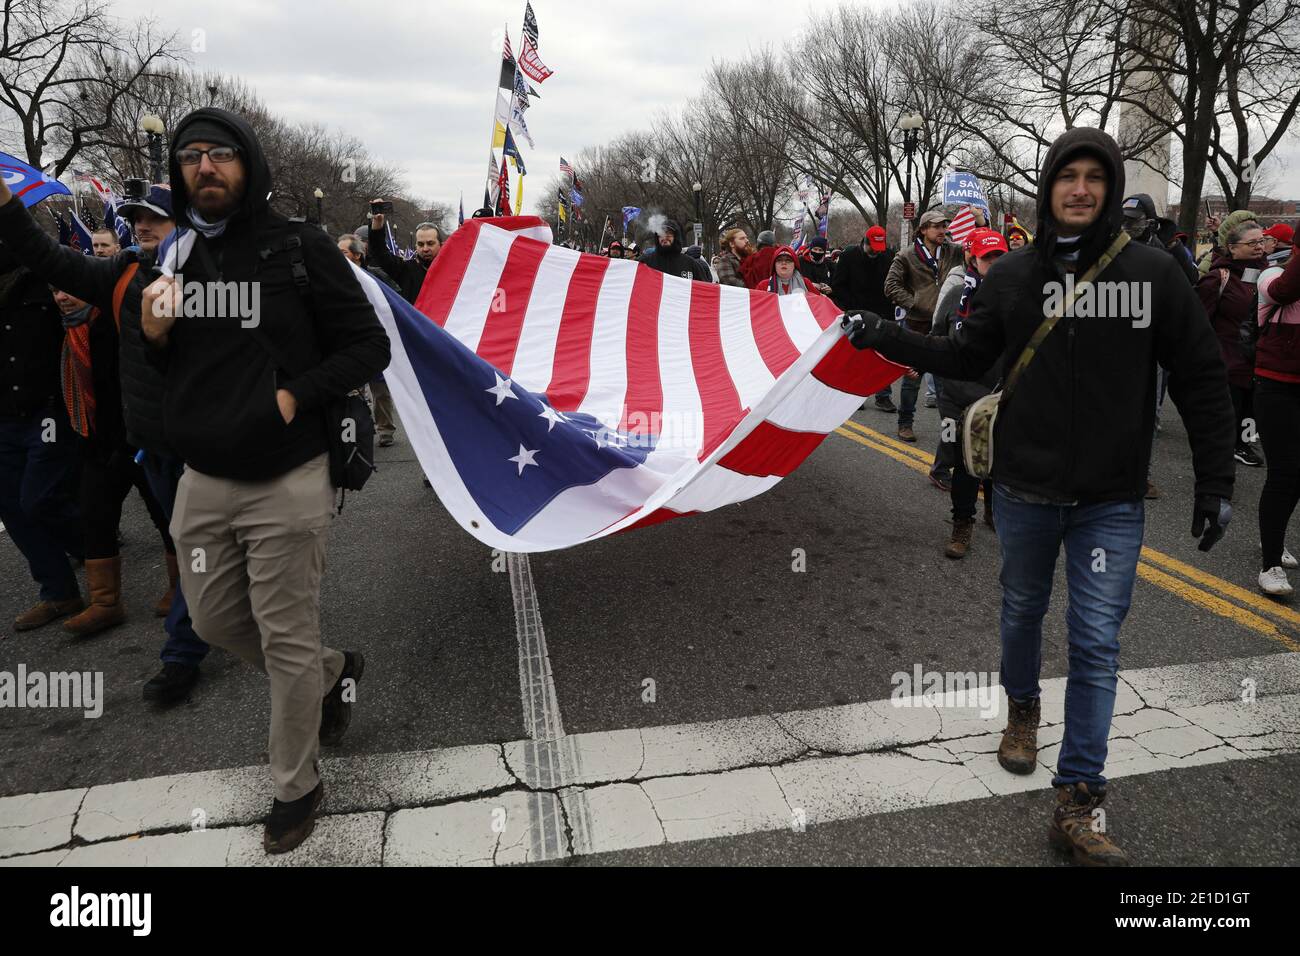 Washington, United States. 06th Jan, 2021. Trump march on streets after Save America Rally on the Ellipse near the White House in Washington on January 6, 2021. Photo by Yuri Gripas/ABACAPRESS.COM Credit: ABACAPRESS/Alamy Live News Stock Photo